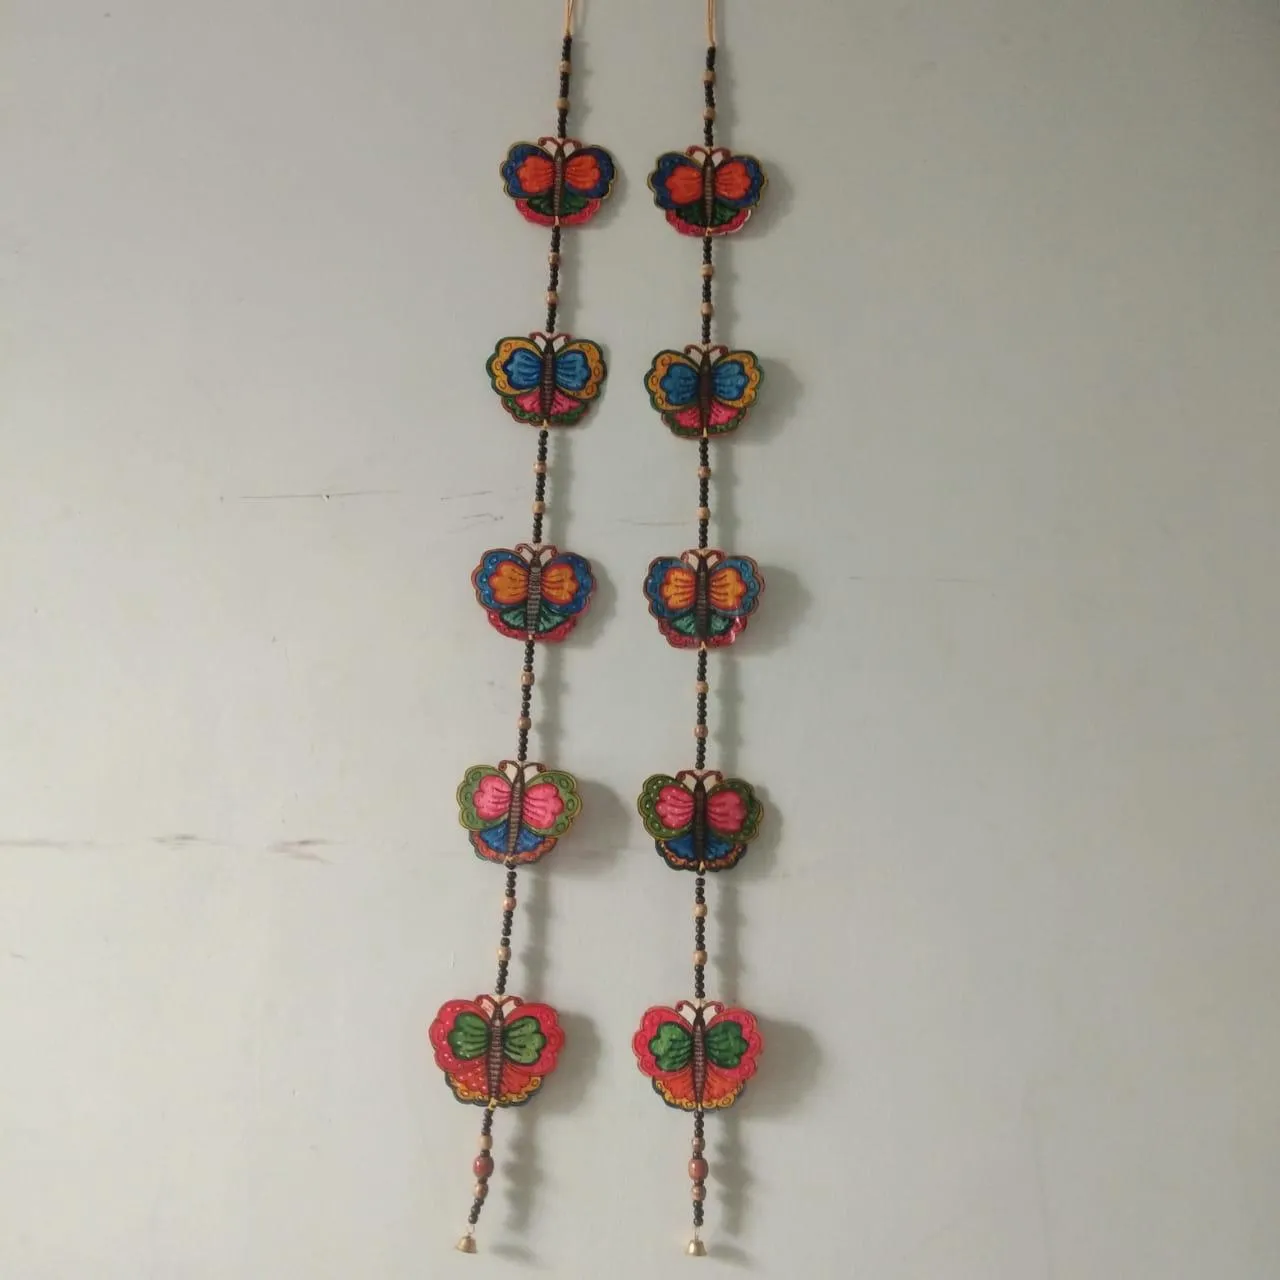 Handpainted decorative wallhanging.
Made of leather.